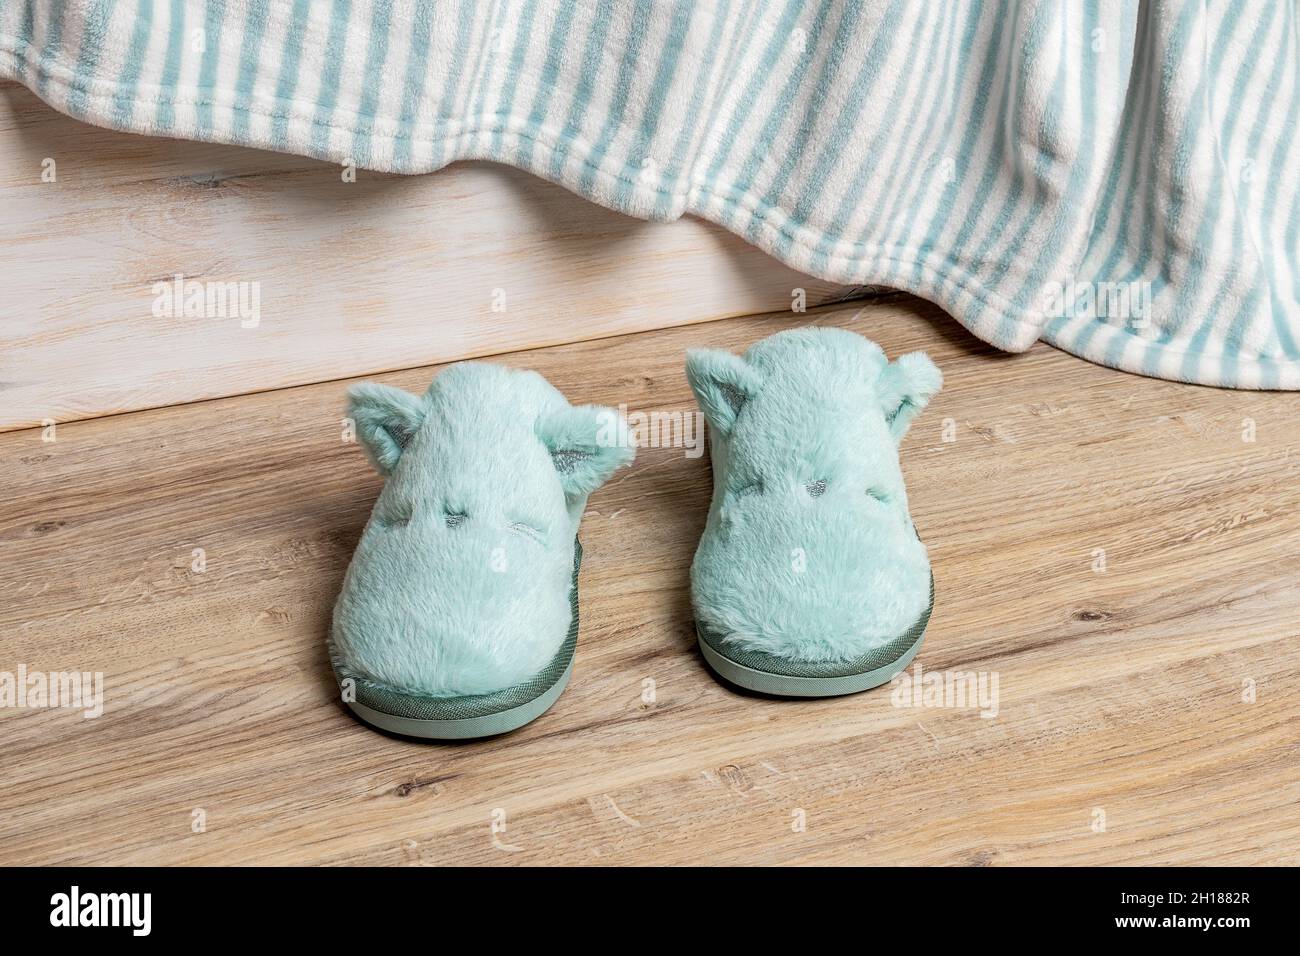 Pair of cat face blue slippers on the floor in the bedroom. New soft fleece cozy slippers for cold winter season. Funny comfy home shoes. Stock Photo